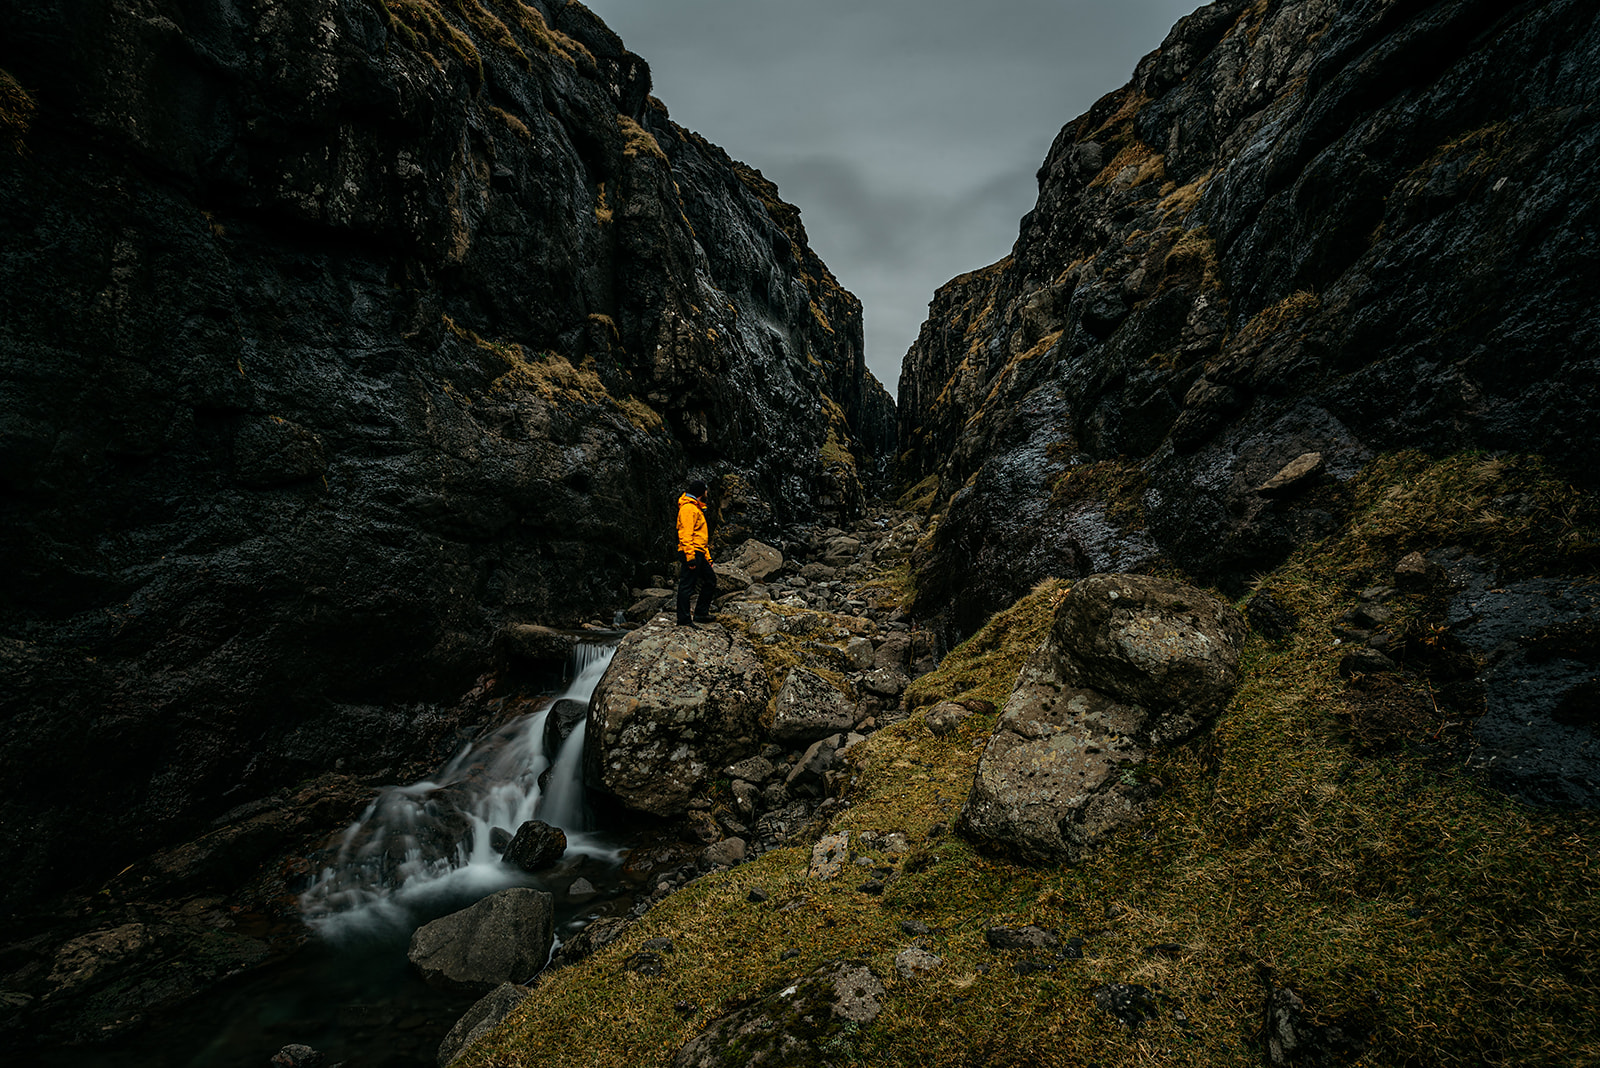 Man in yellow jacket standing in gorge